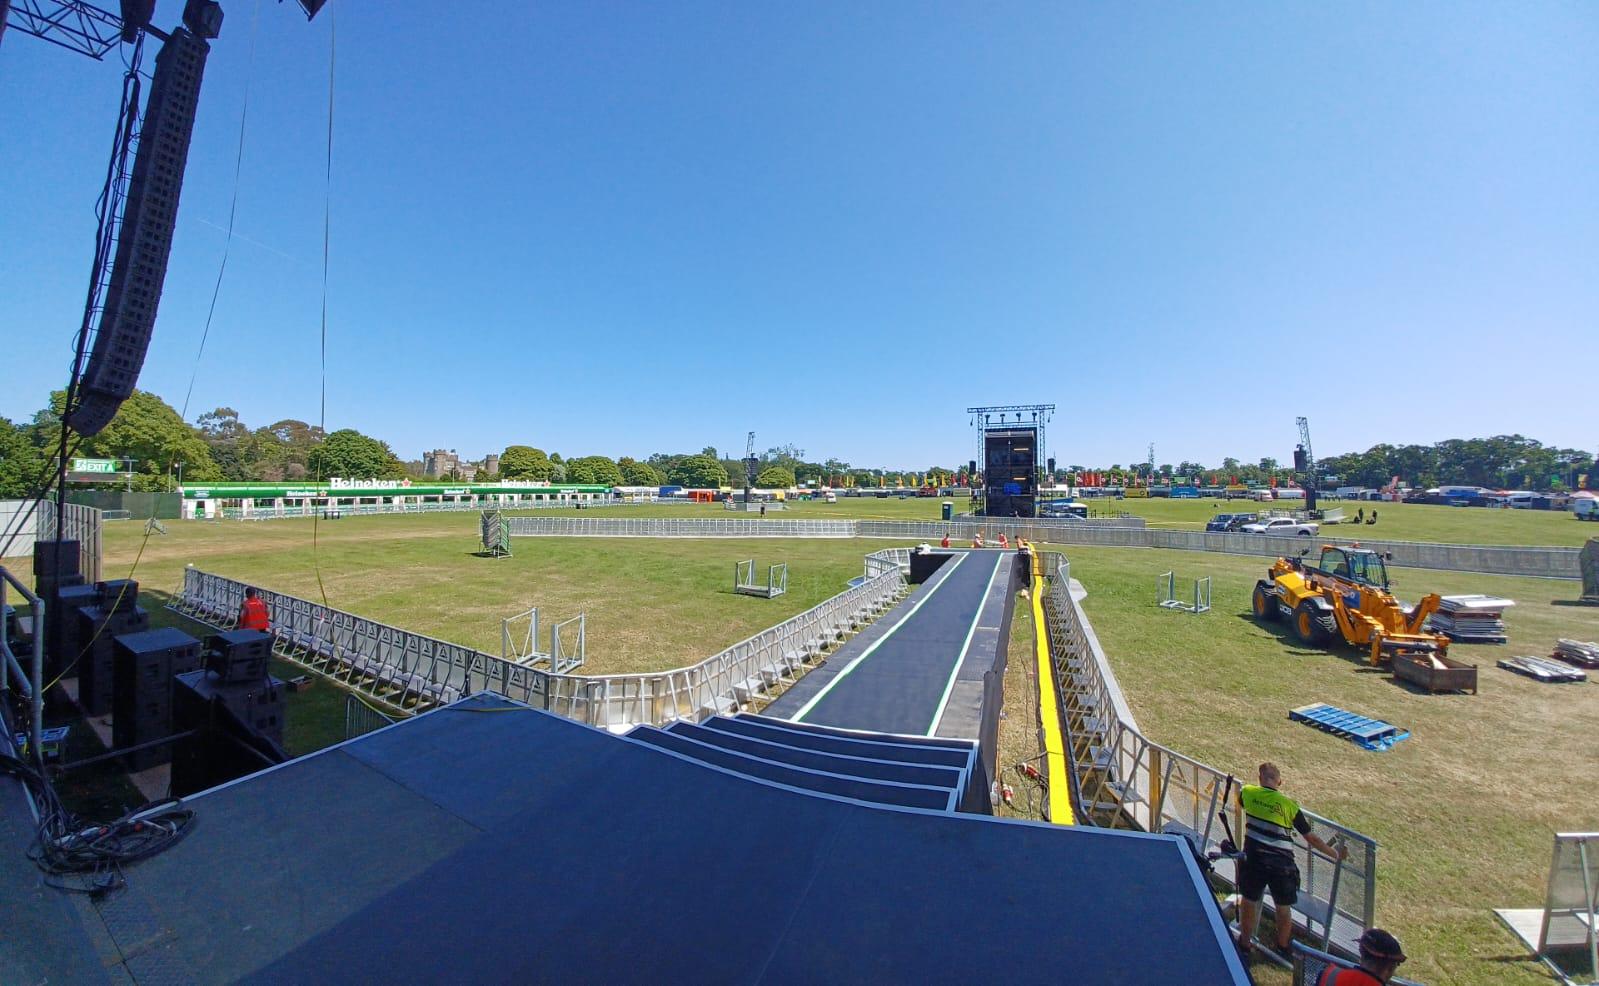 The final touches are being done at Malahide ahead of Depeche Mode headlining